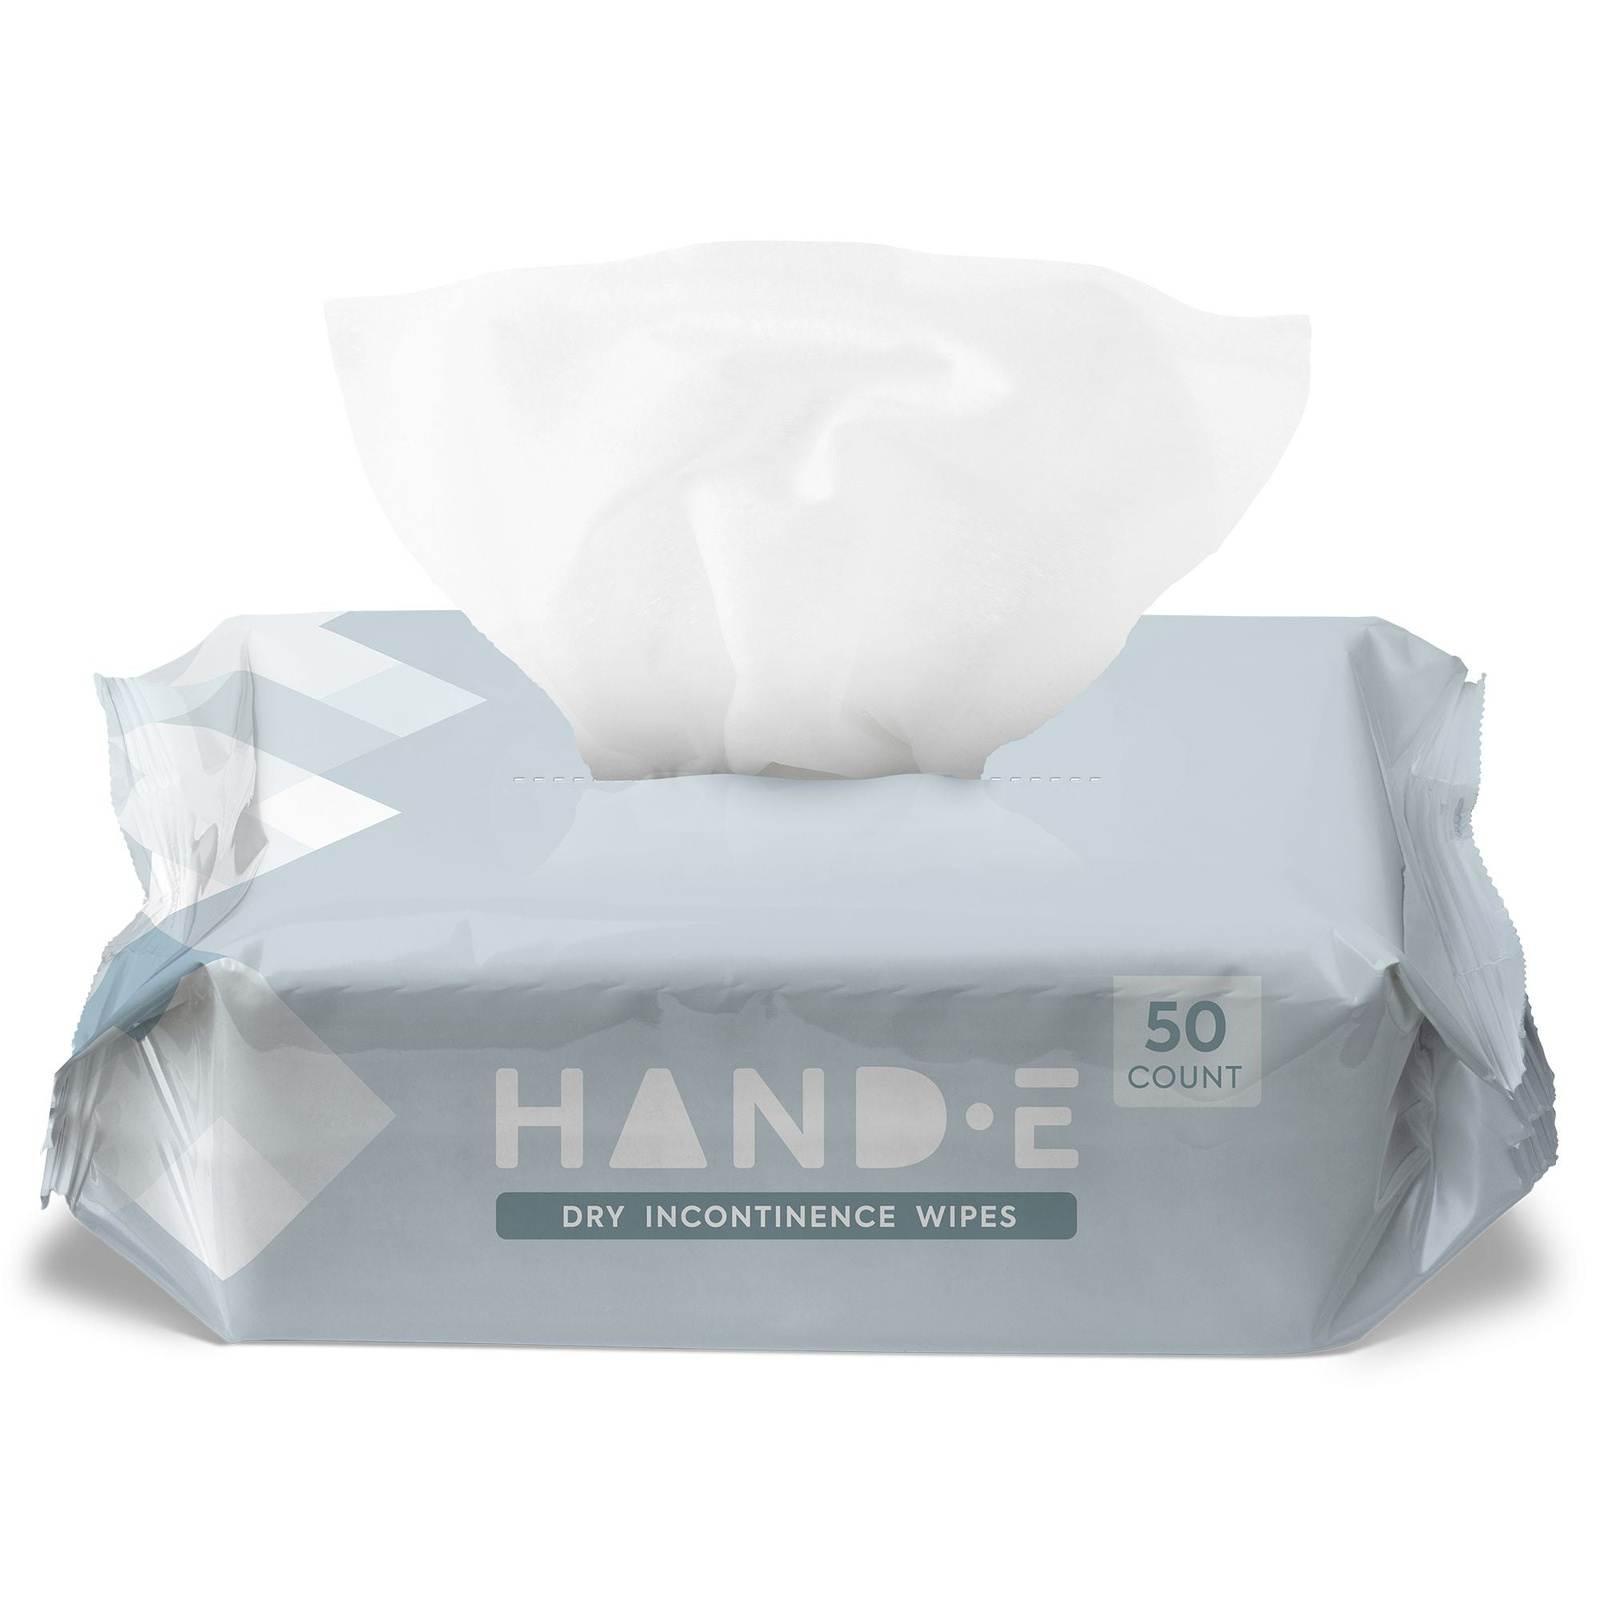 Disposable Dry Wipes - For Incontinence and Senior Care Hand-E Touch